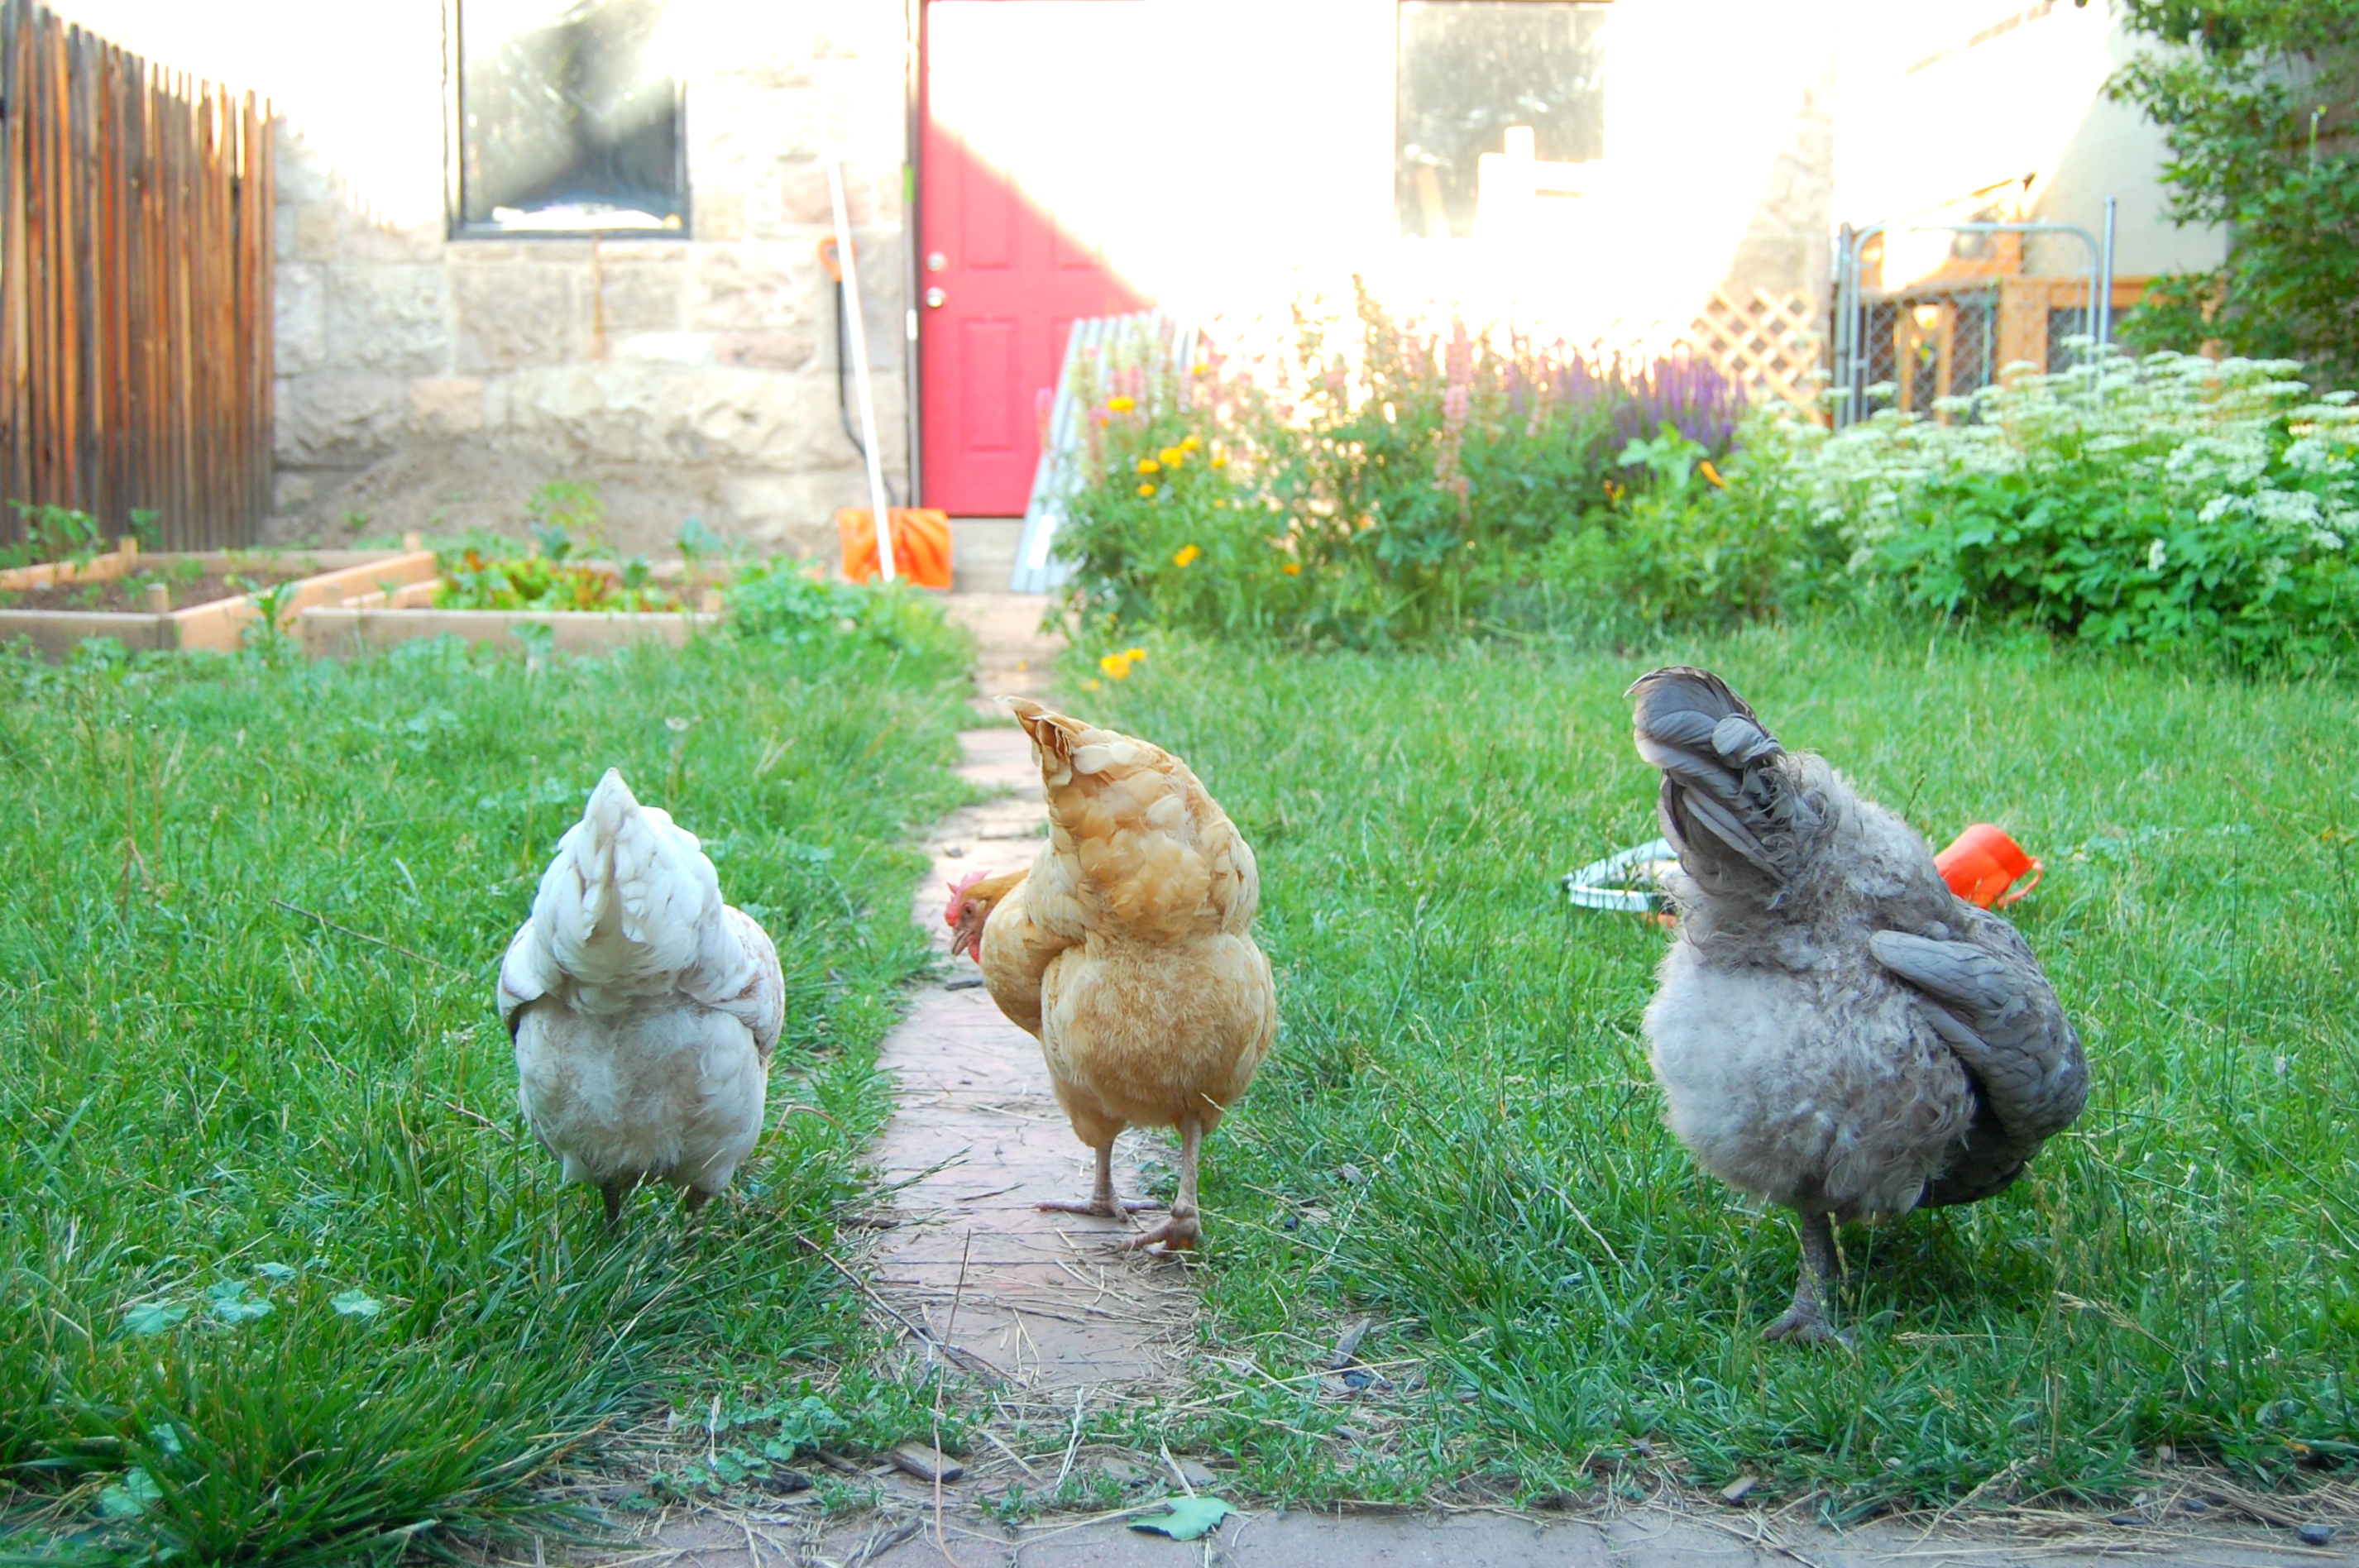 The 3 chickens in Uproot Garden